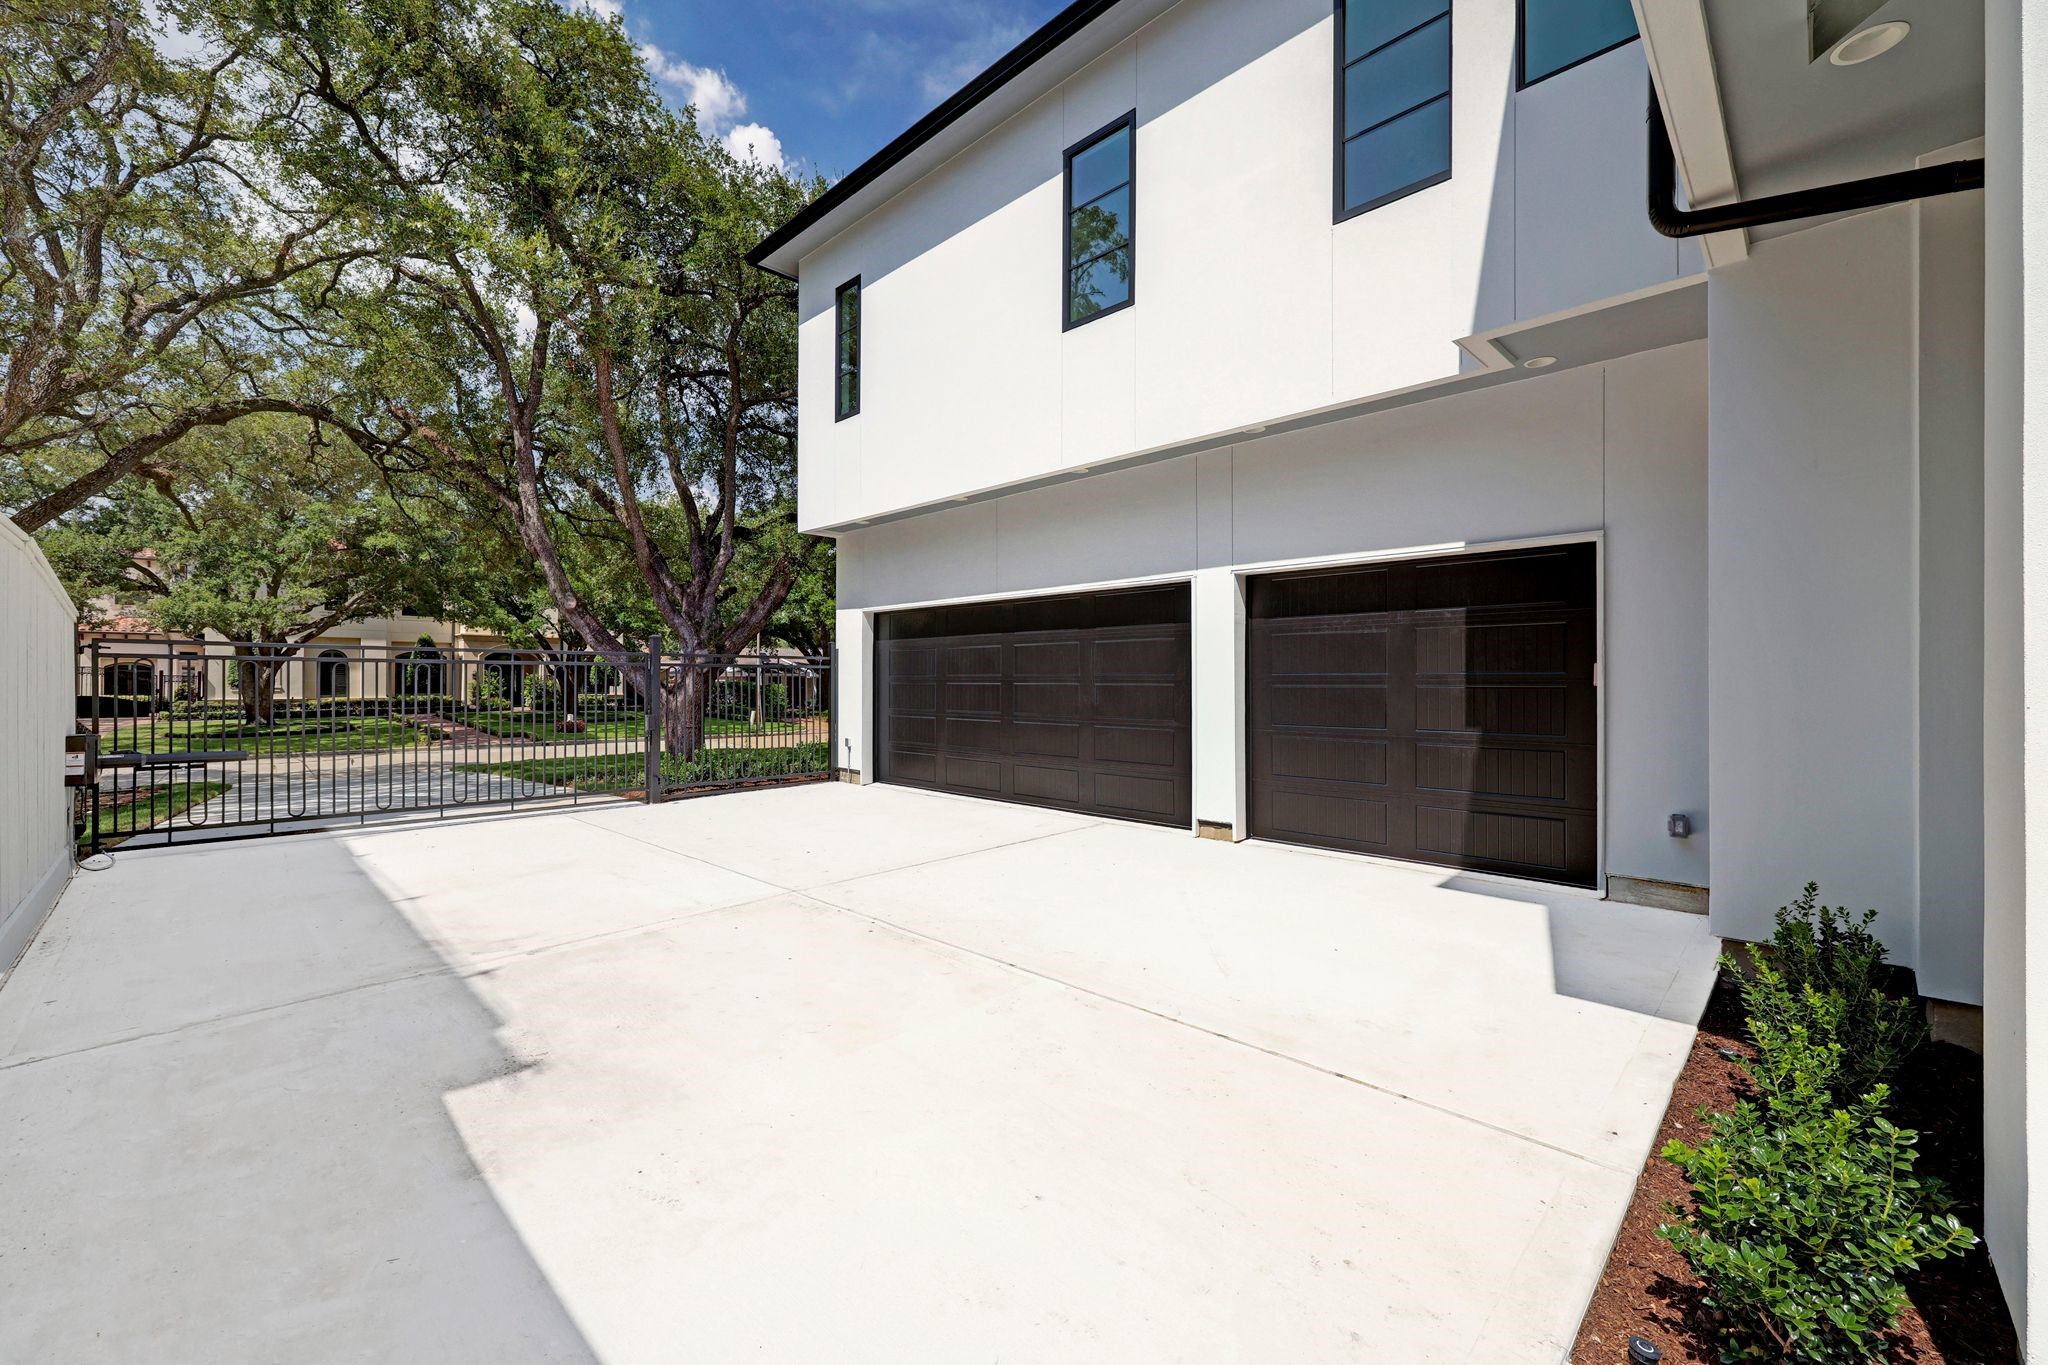 Electronic driveway gate leading to a Three car attached garage and additional parking space